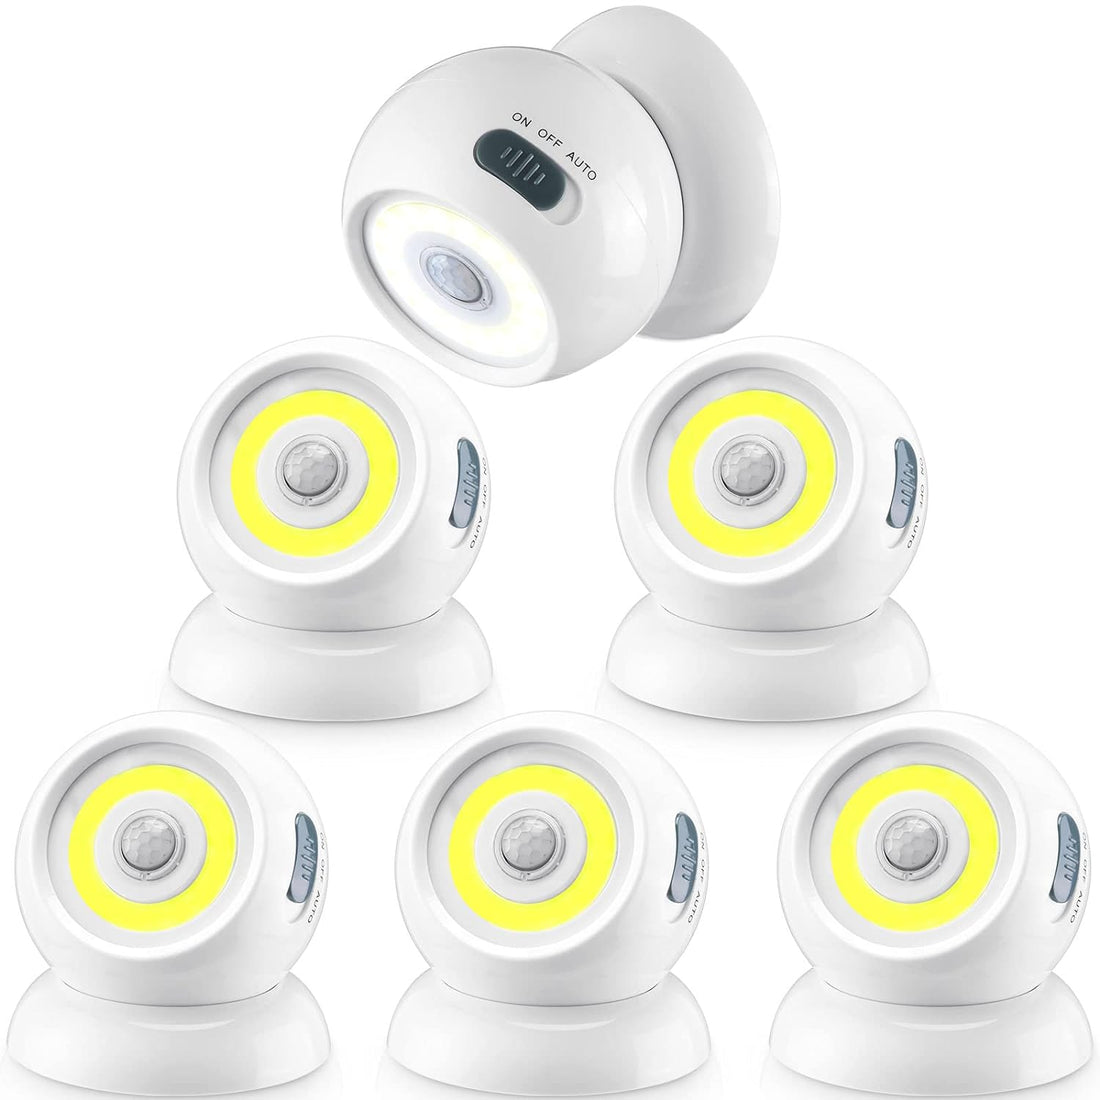 6 Pcs Motion Sensor Lights 360°motion Activated Night Lights Battery Operated Outdoor Lights Safe Portable Motion Detector Lights for Outside LED Wall Light Fixture for Closet Stair Wardrobe Garage